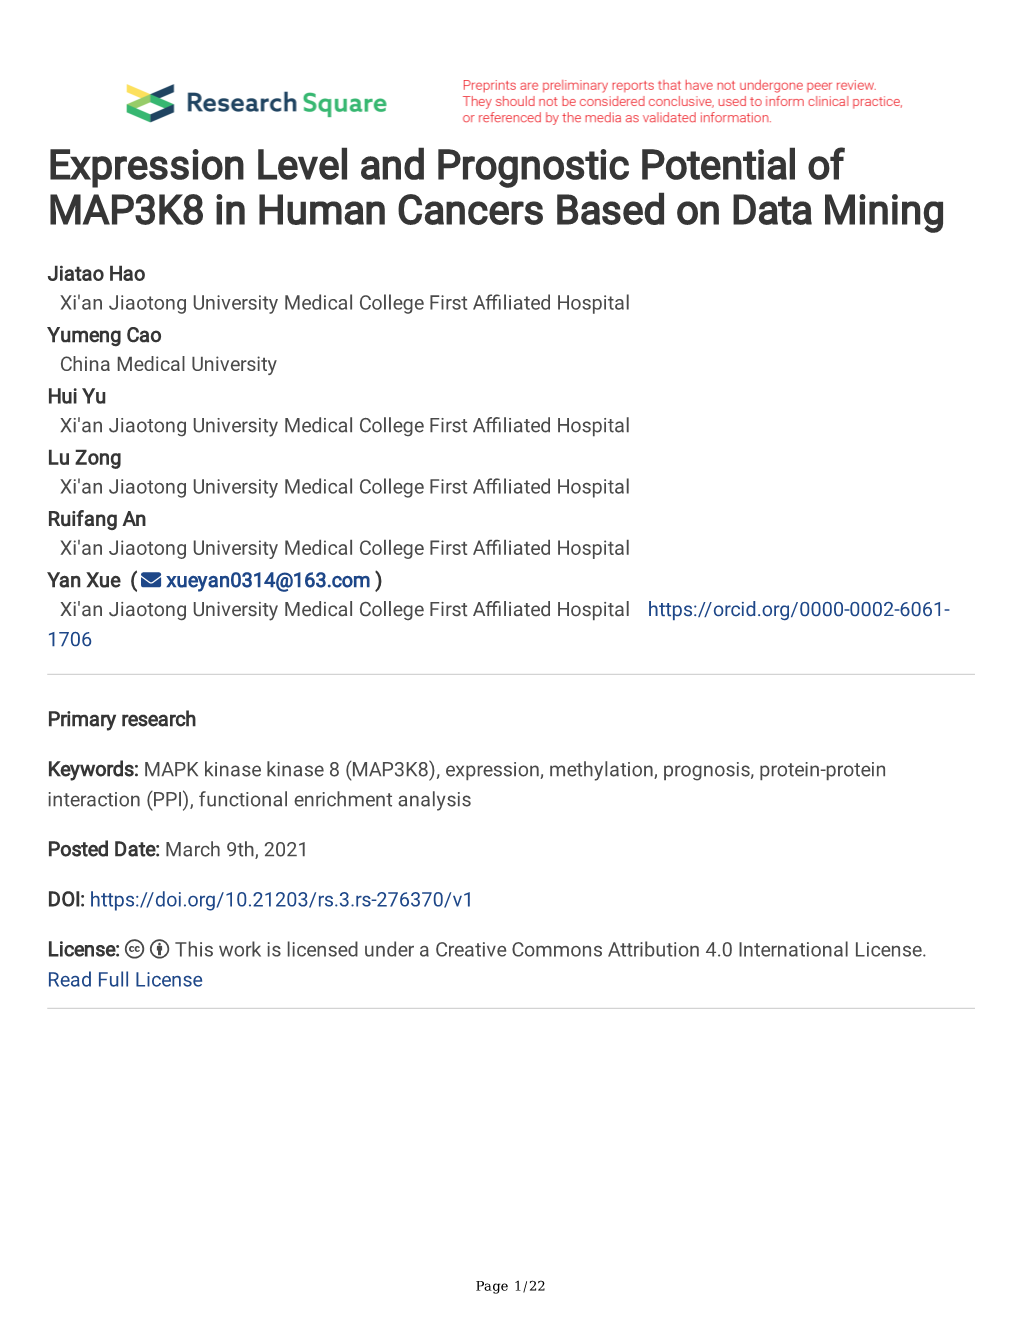 Expression Level and Prognostic Potential of MAP3K8 in Human Cancers Based on Data Mining